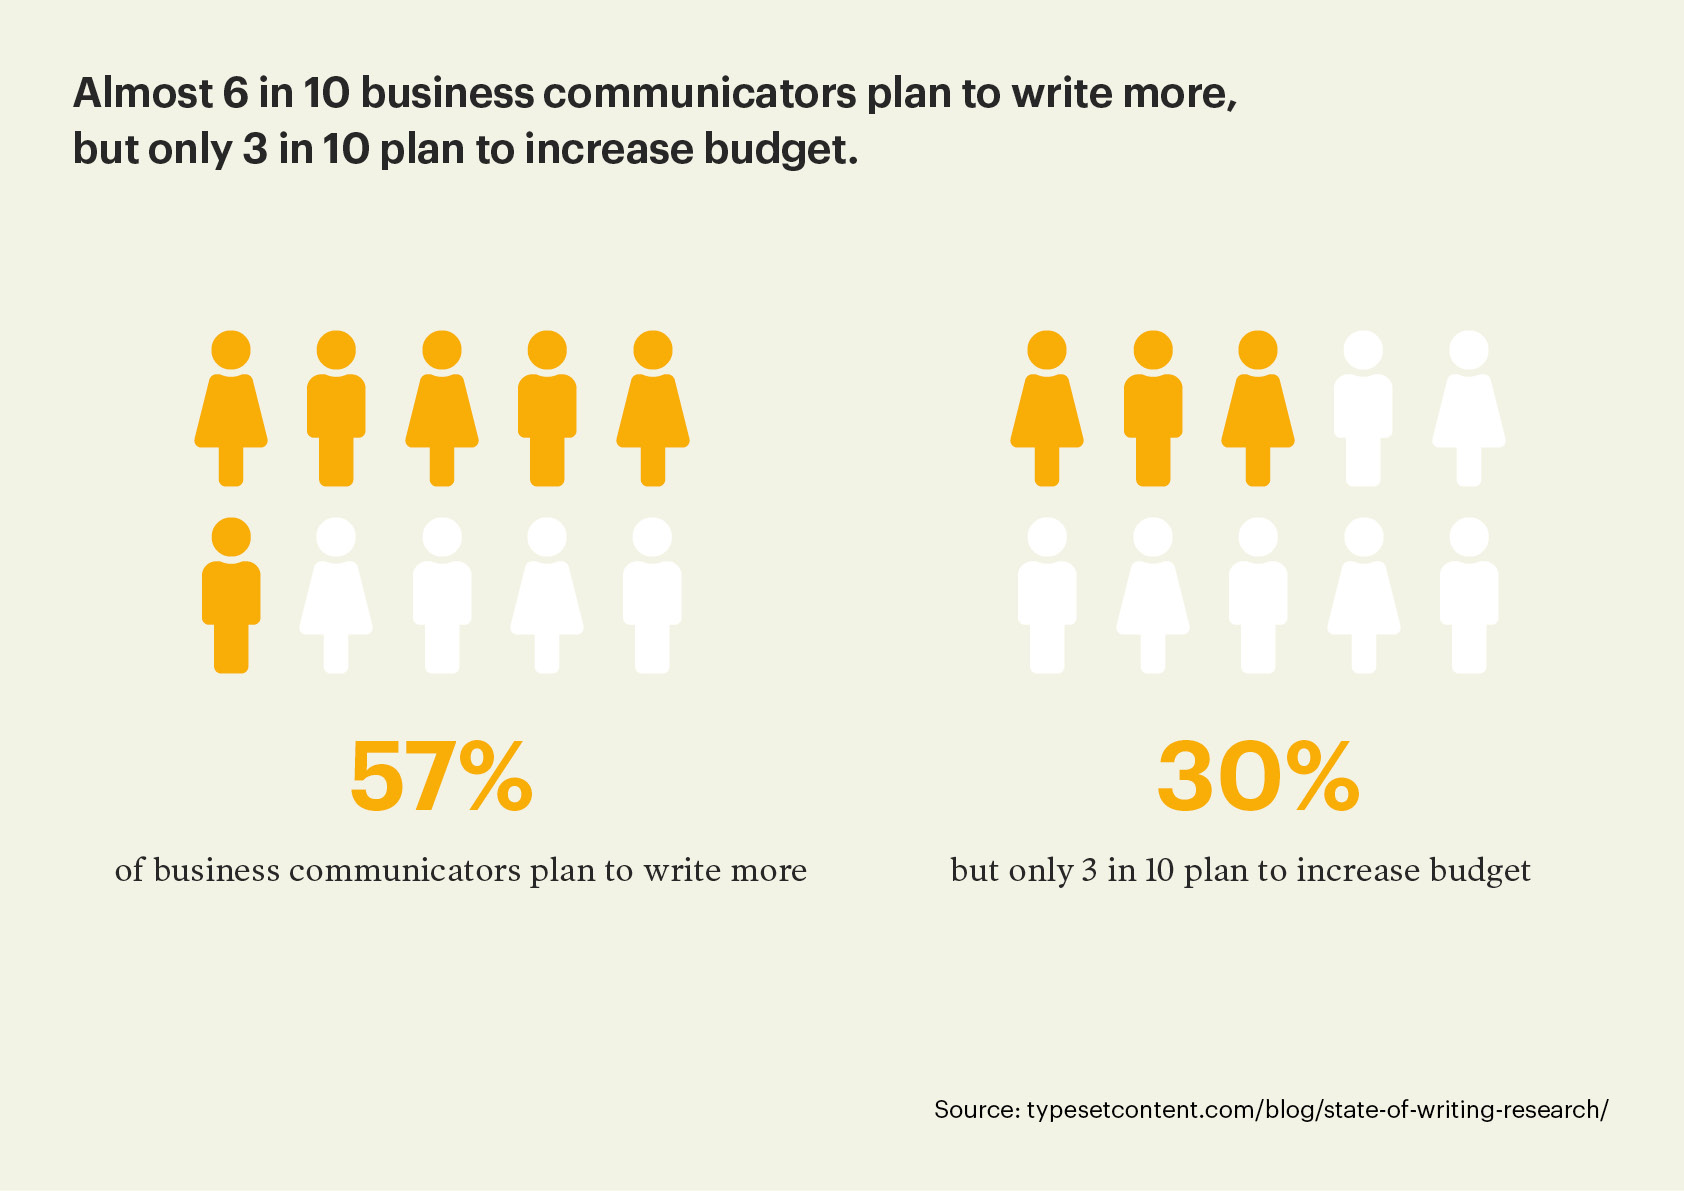 Graphic showing 6 in 10 business communicators will write more but only 3 in 10 plan to increase budget.